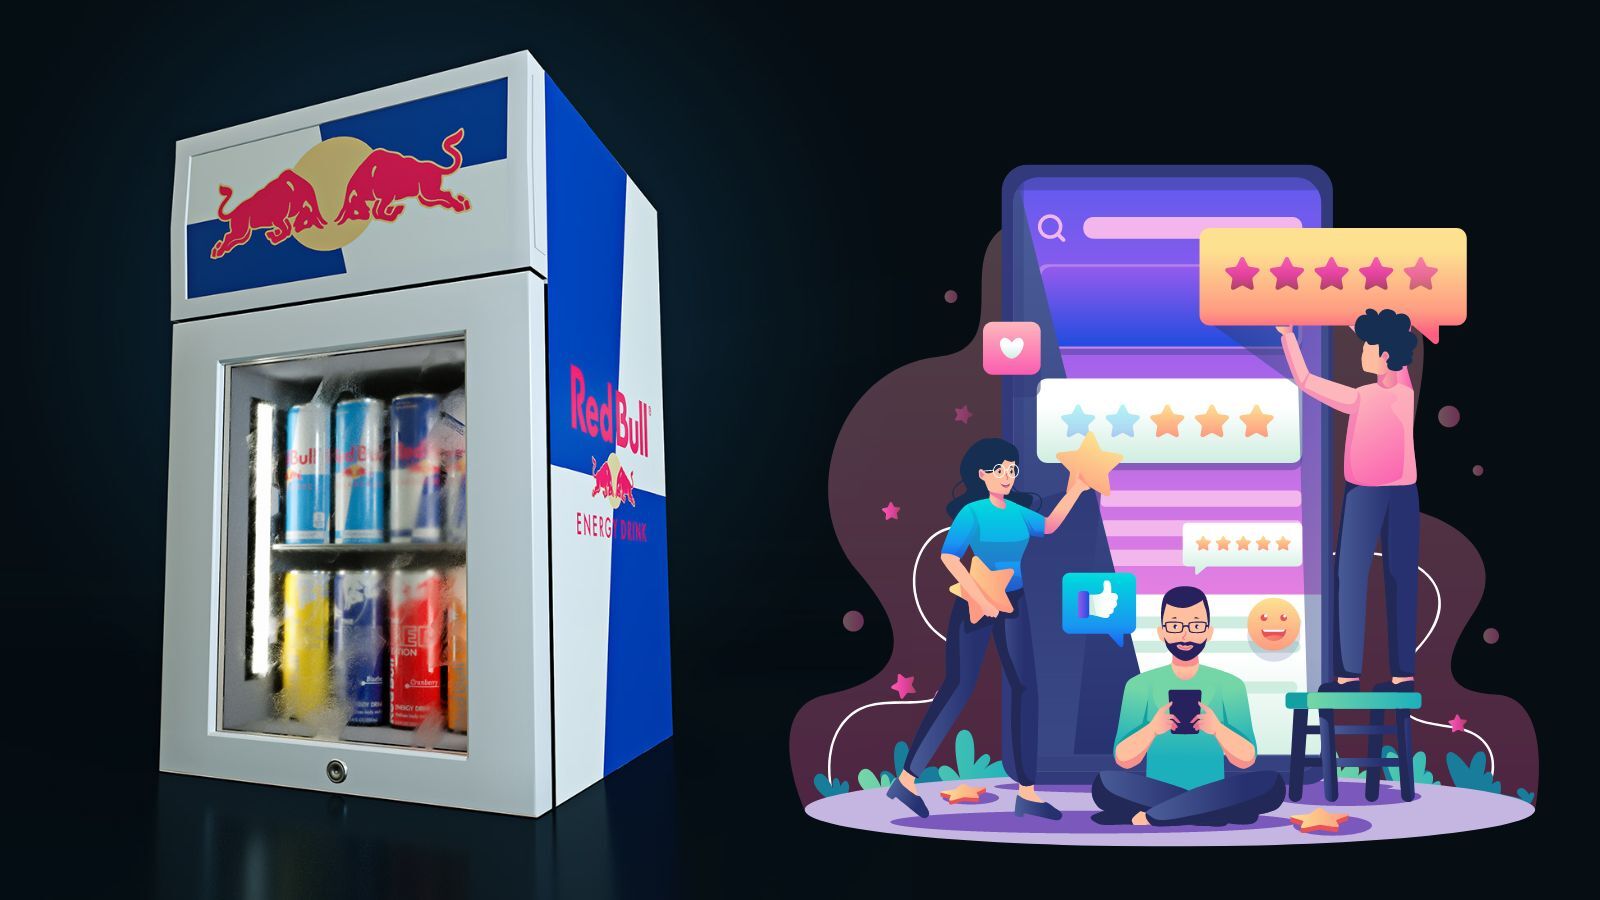 Red Bull Mini Fridge Review: Is It Worth Buying?